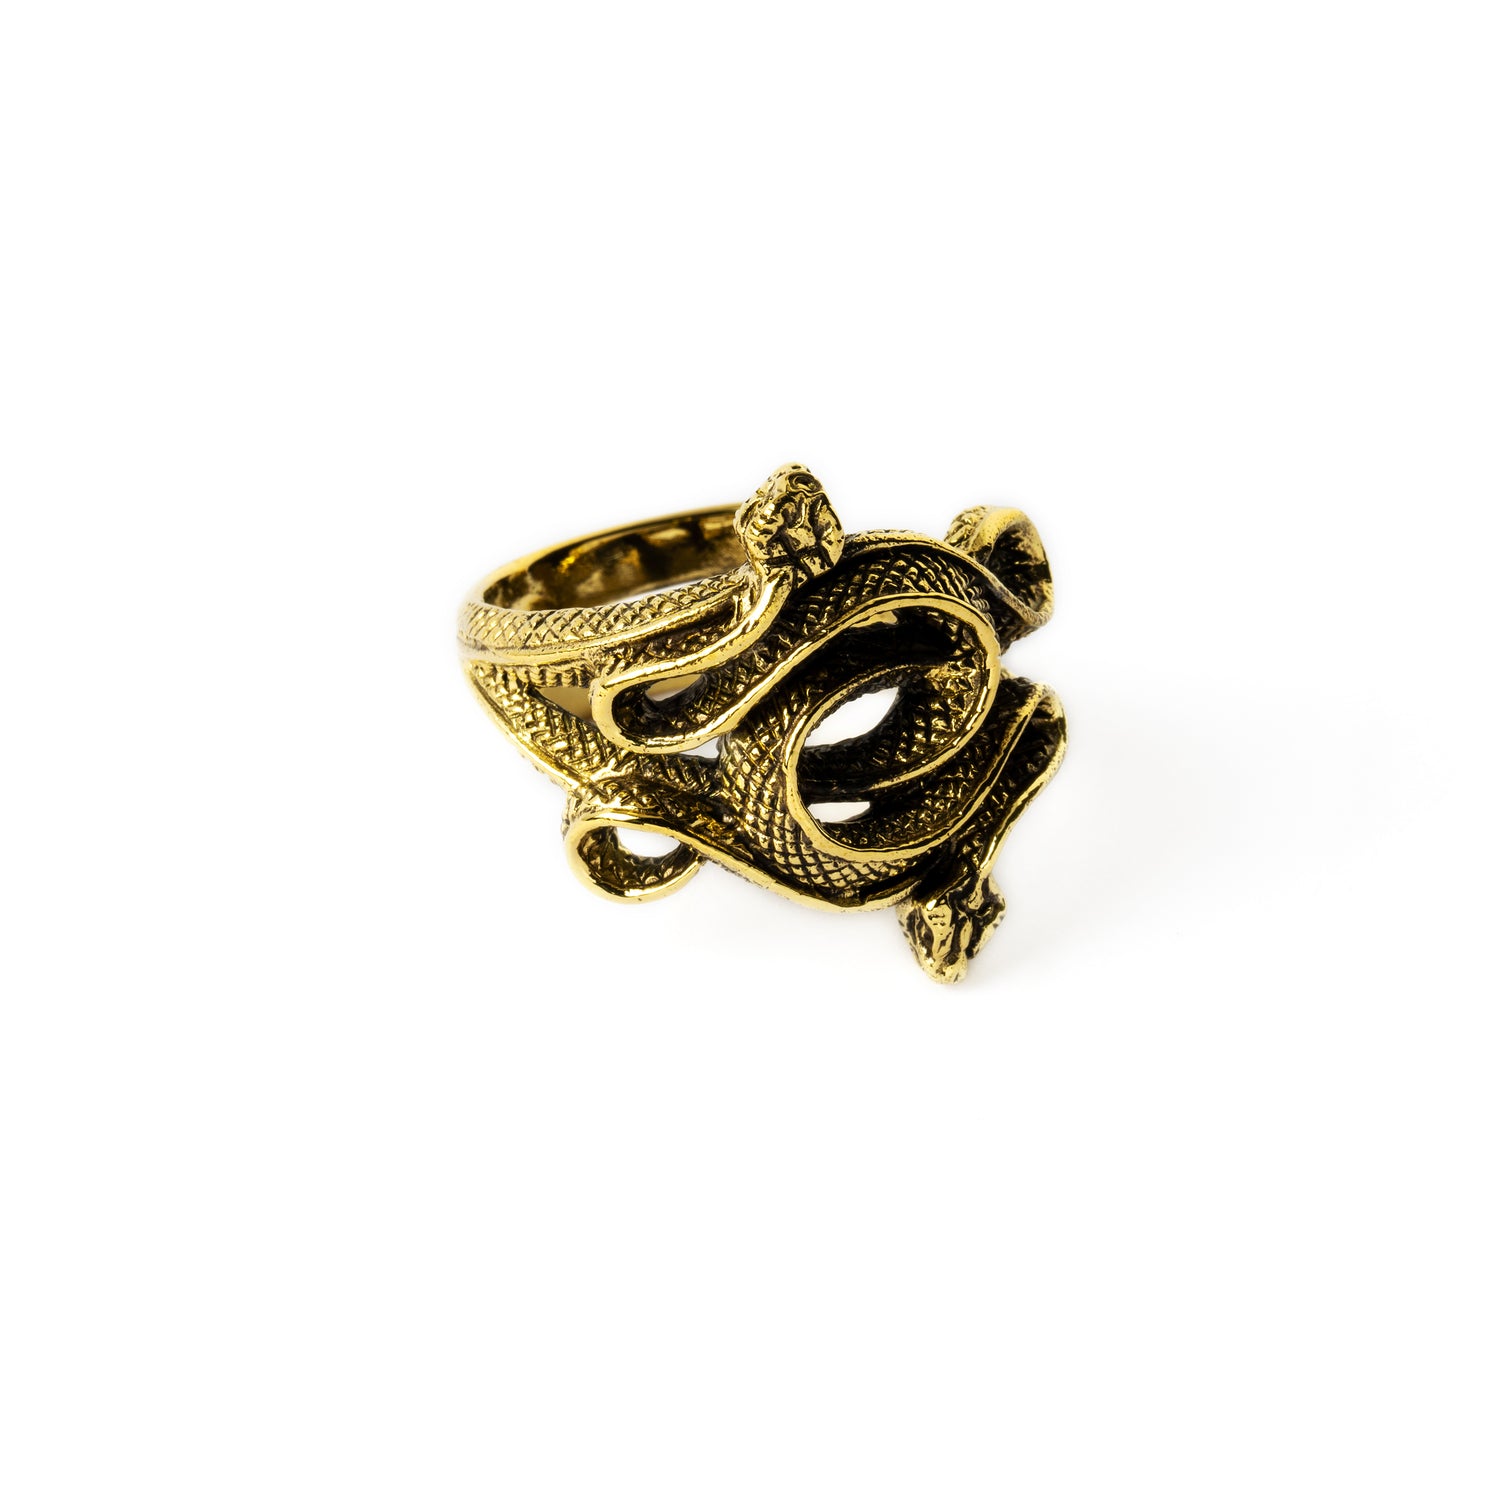 Golden brass Entwined Serpents adjustable ring right side view